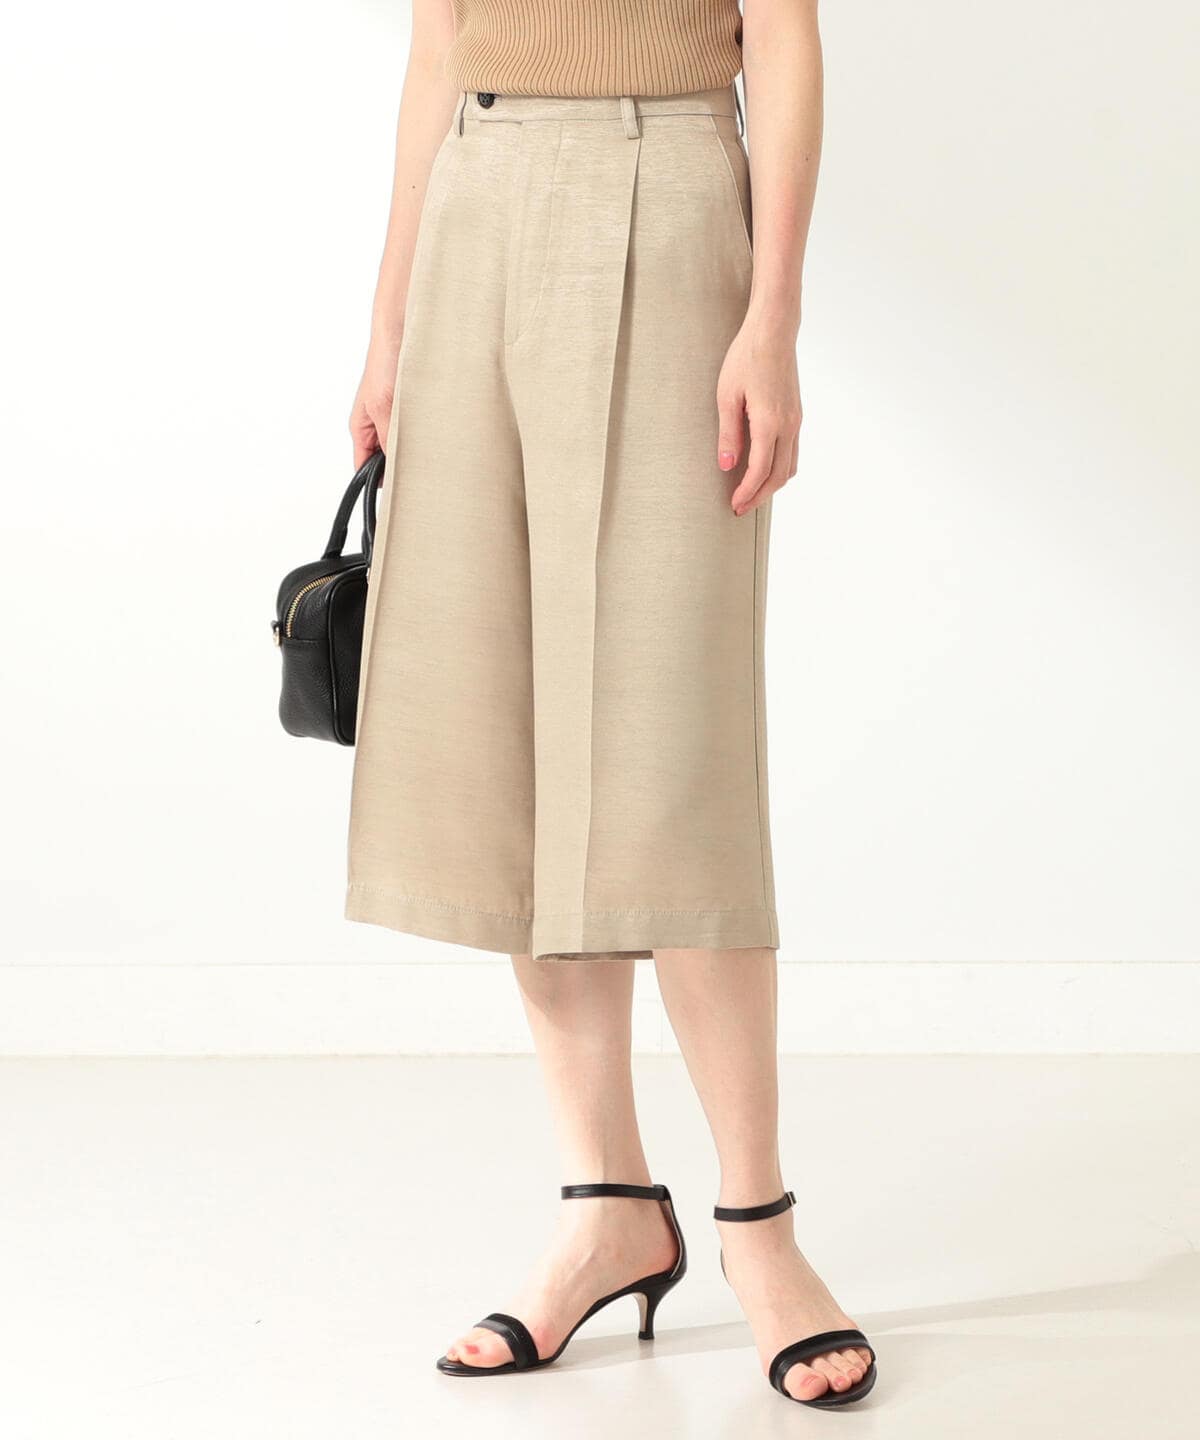 Demi-Luxe BEAMS [Demi-Luxe BEAMS] BERWICH / Rayon flare culottes